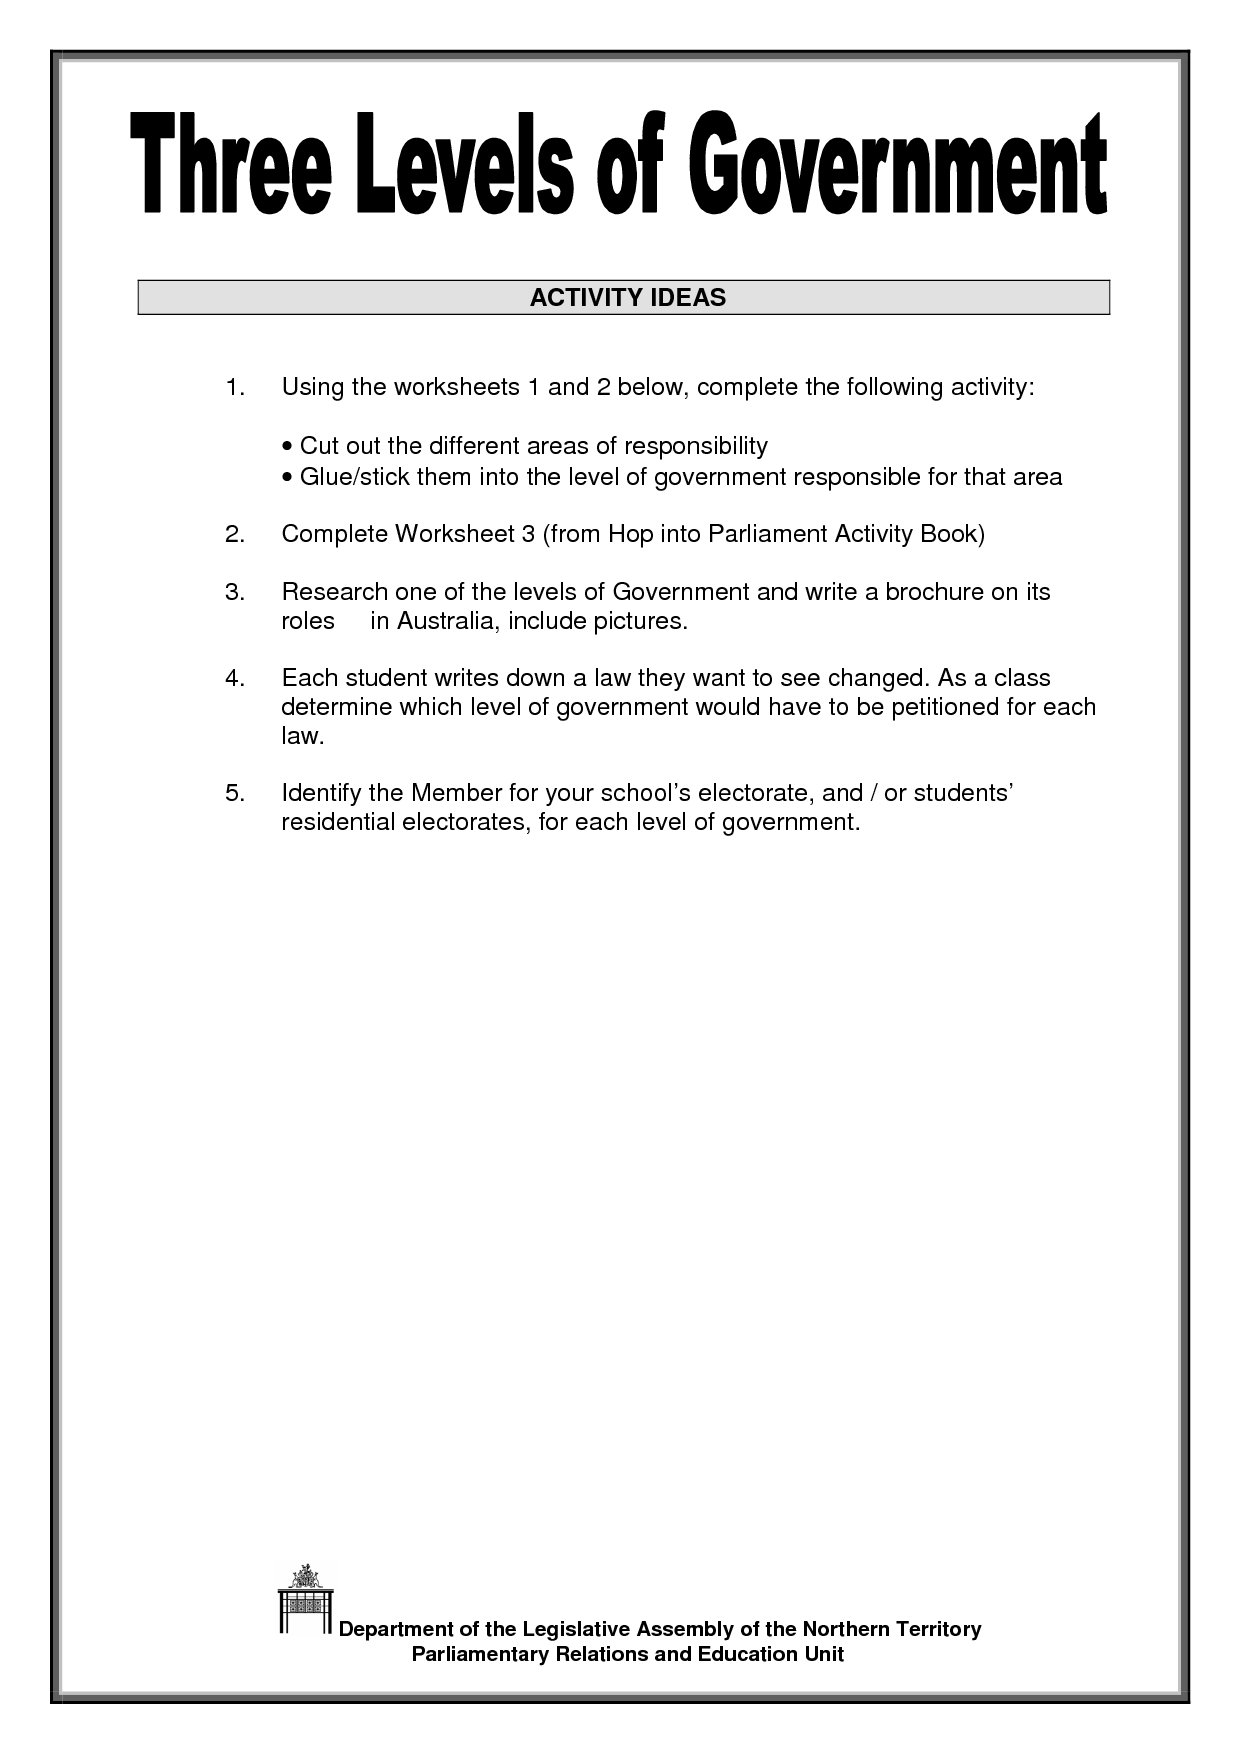 12-best-images-of-three-branches-of-government-worksheet-4th-grade